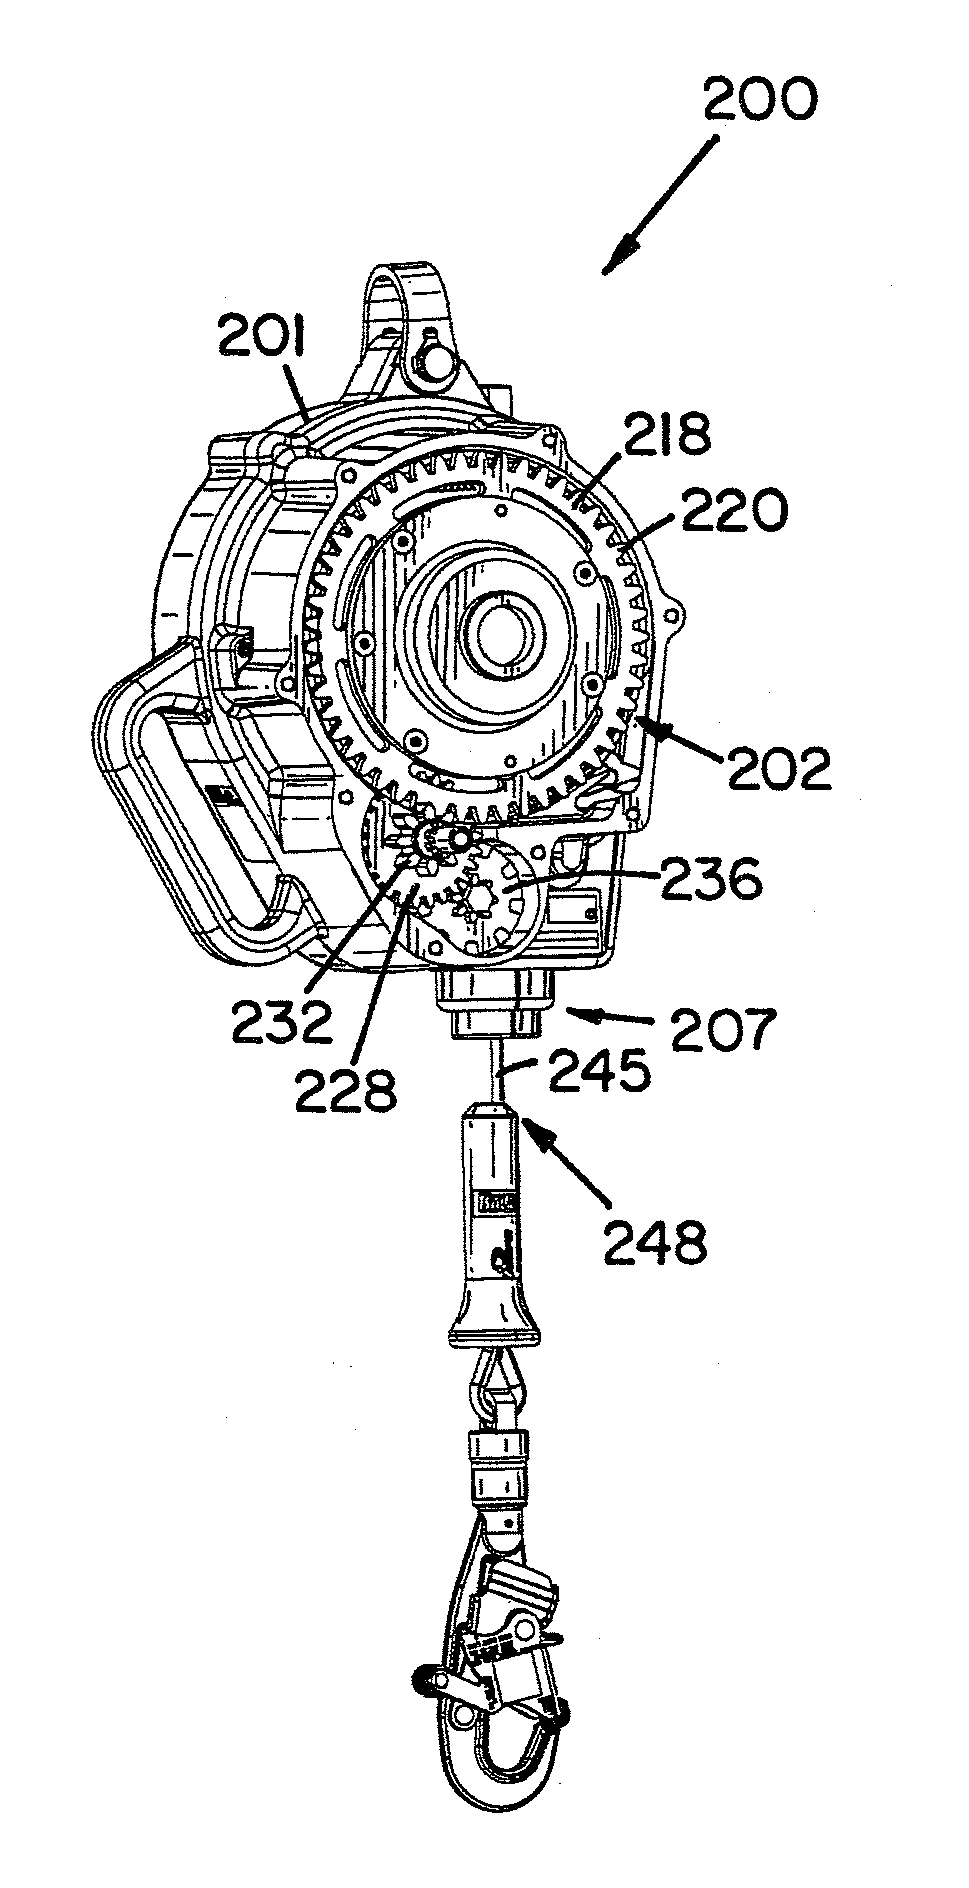 Fall protection safety device with a braking mechanism